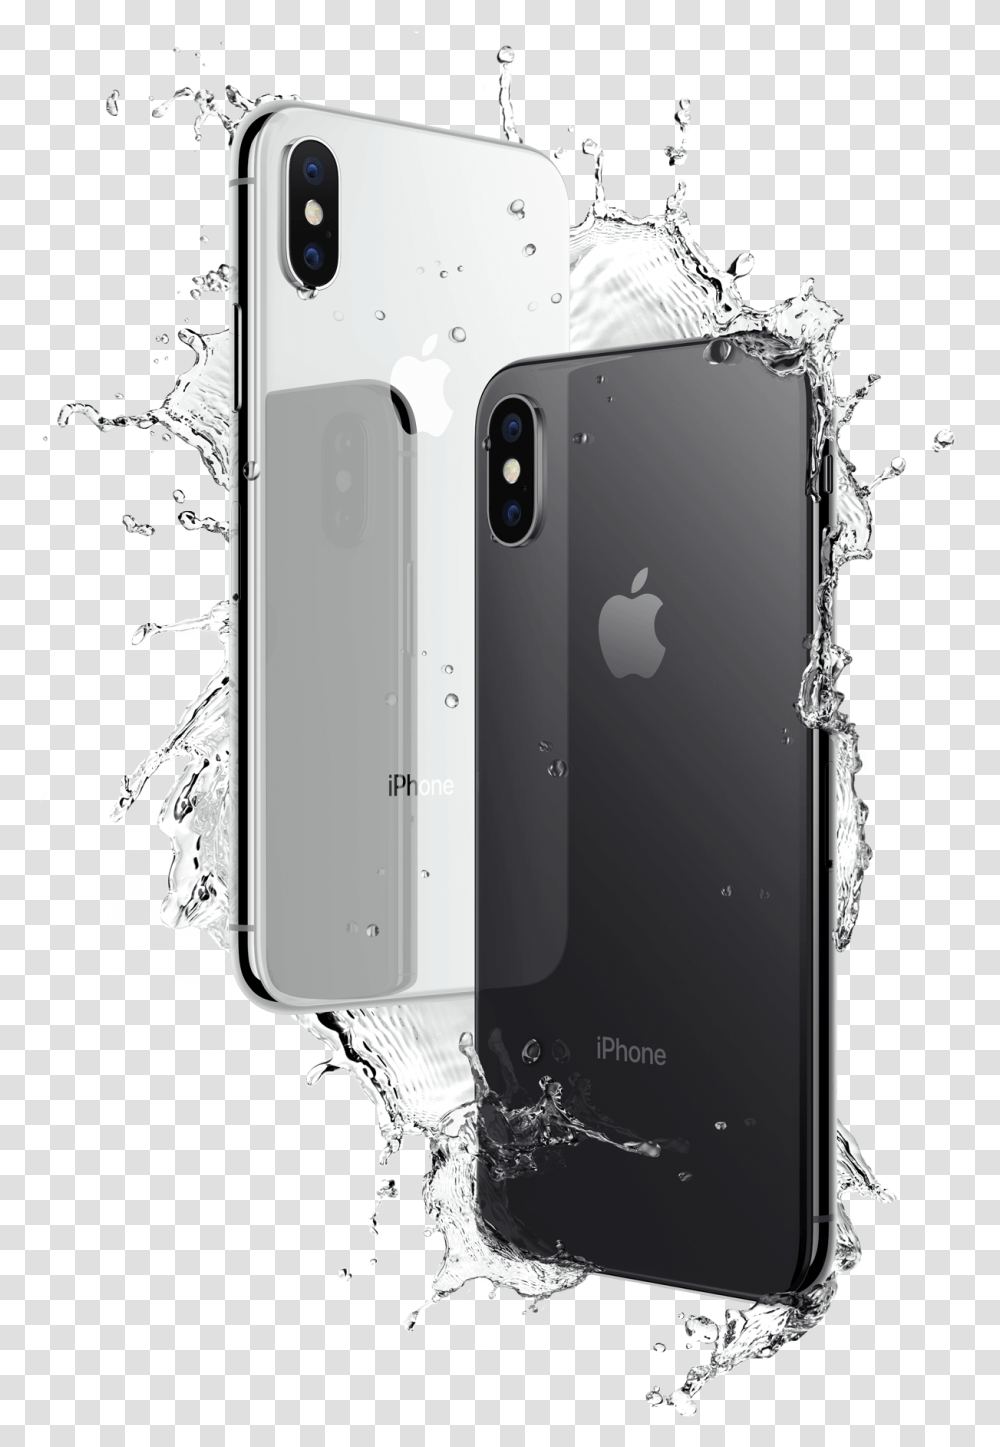 Apple Iphone X The Good Guys Iphone Xs Space Grey Vs Silver, Electronics, Mobile Phone, Cell Phone,  Transparent Png